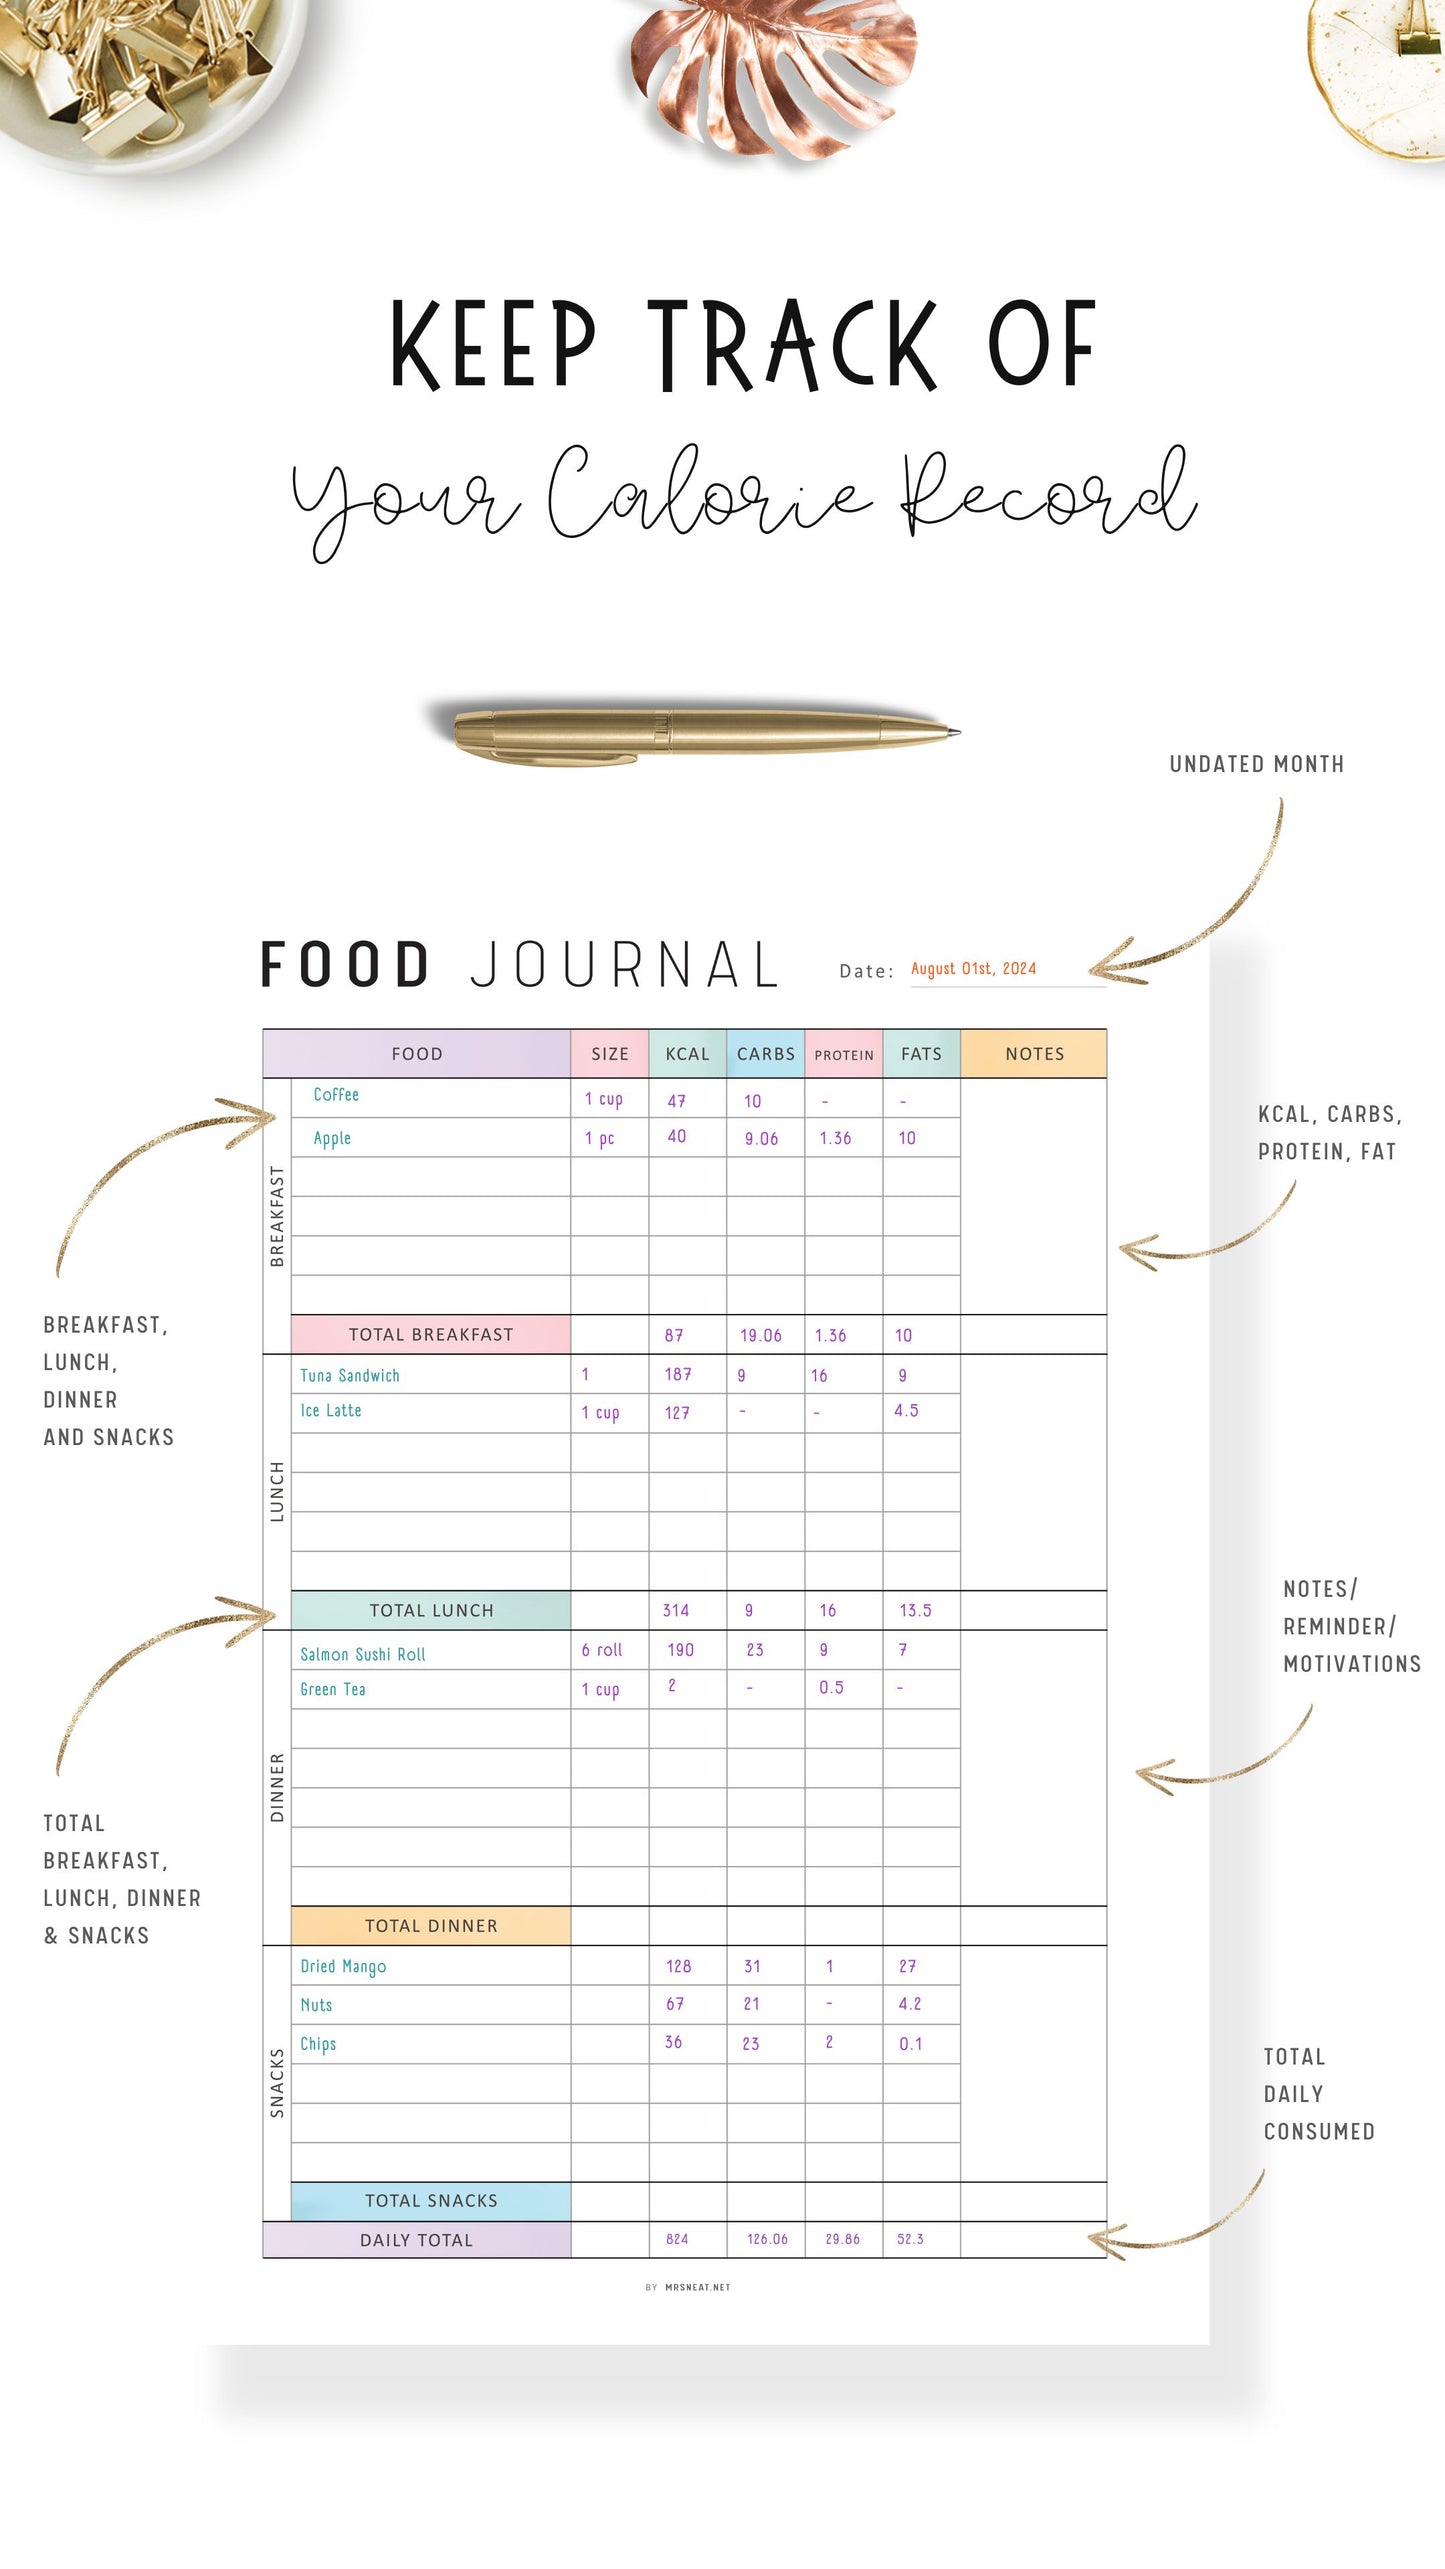 How to use Daily Calorie Tracker Template Printable, Calorie Counter PDF, My Food Diary, Digital Daily Food Journal, A4, A5, Letter, Half Letter, Colorful Page